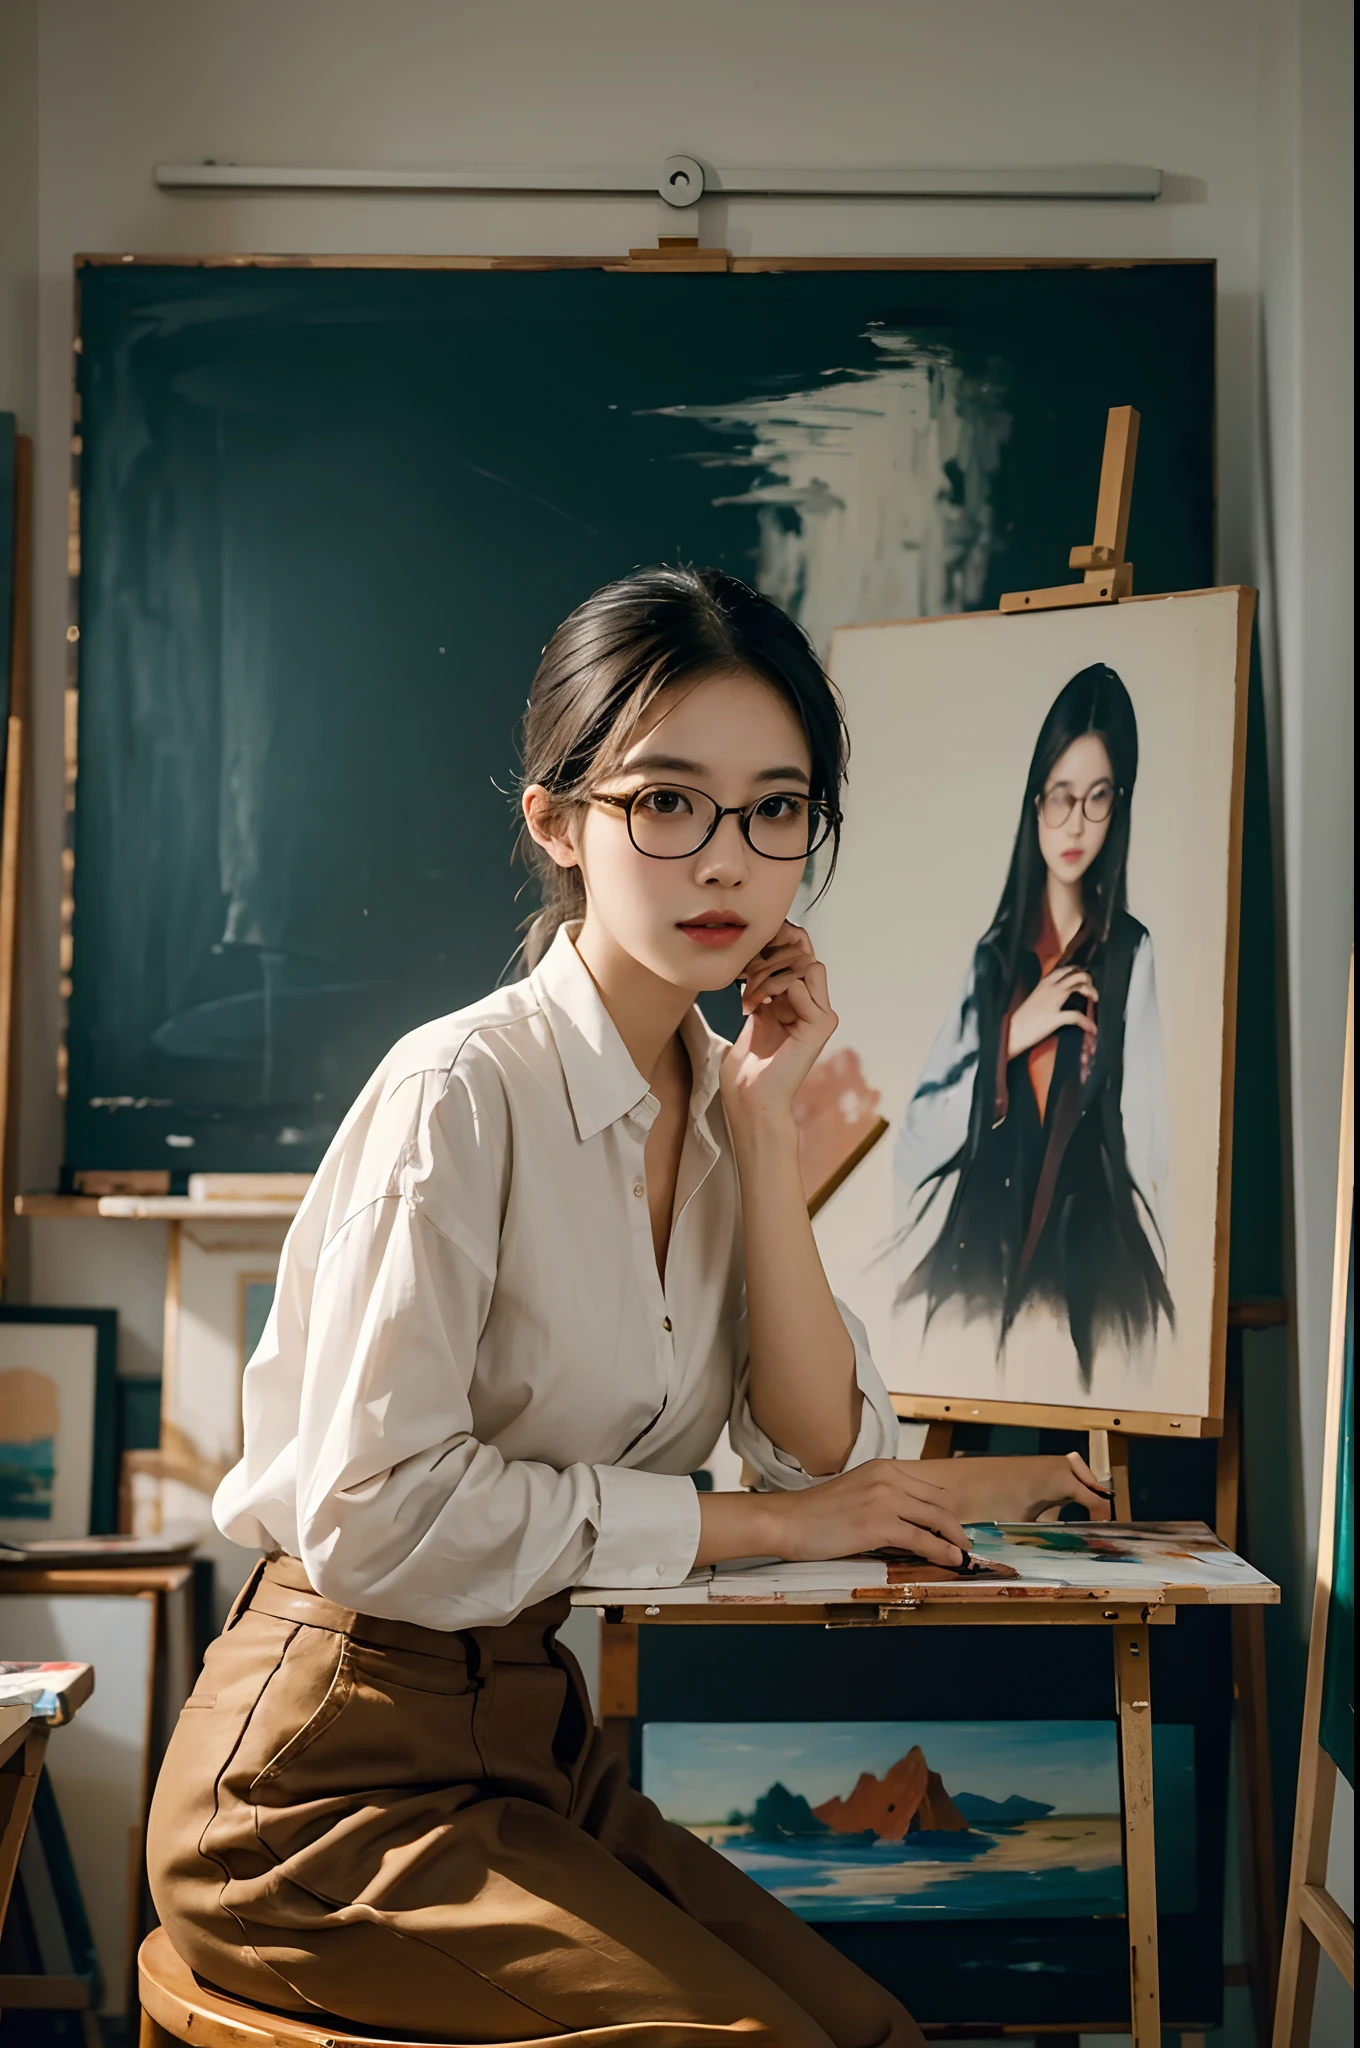 there is a woman sitting on a chair with a Peinture on the easel, a fine art Peinture inspired by Lin Liang, Station artistique, art de processus, avec des lunettes, avec des lunettes on, dans sa salle d’art, belle fille asiatique, Peinture, Peinture, lunettes épaisses, porter des lunettes, Fille coréenne, tout habillé. Peinture of sexy, apparence ringard